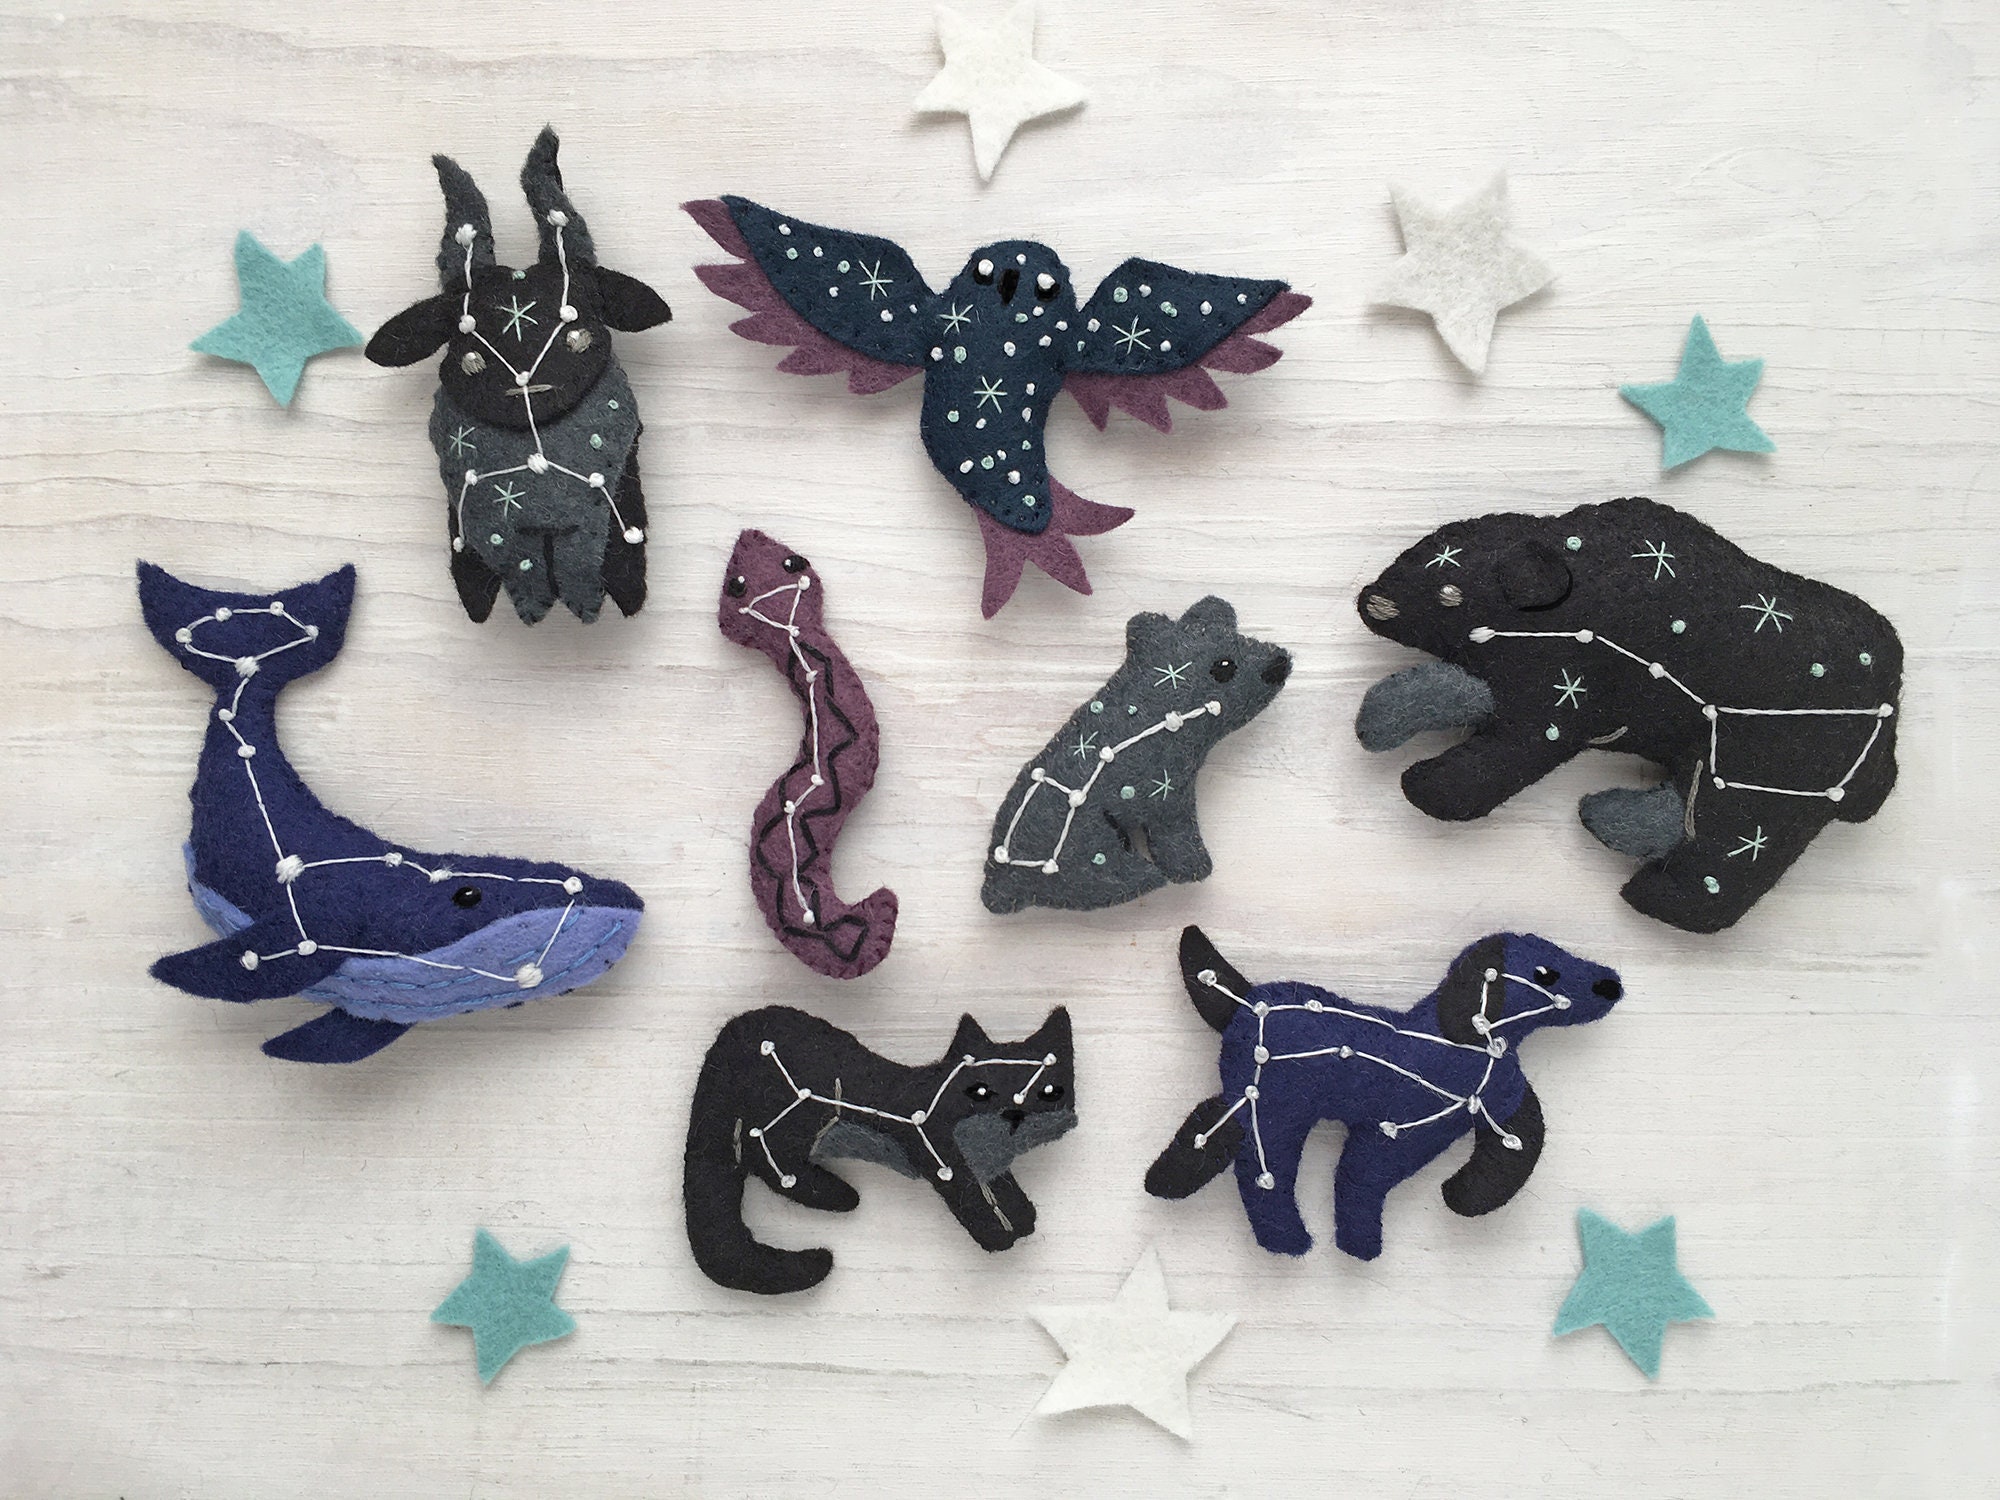 All 8 Constellation Animals Sewing Pattern PDF Download - Etsy